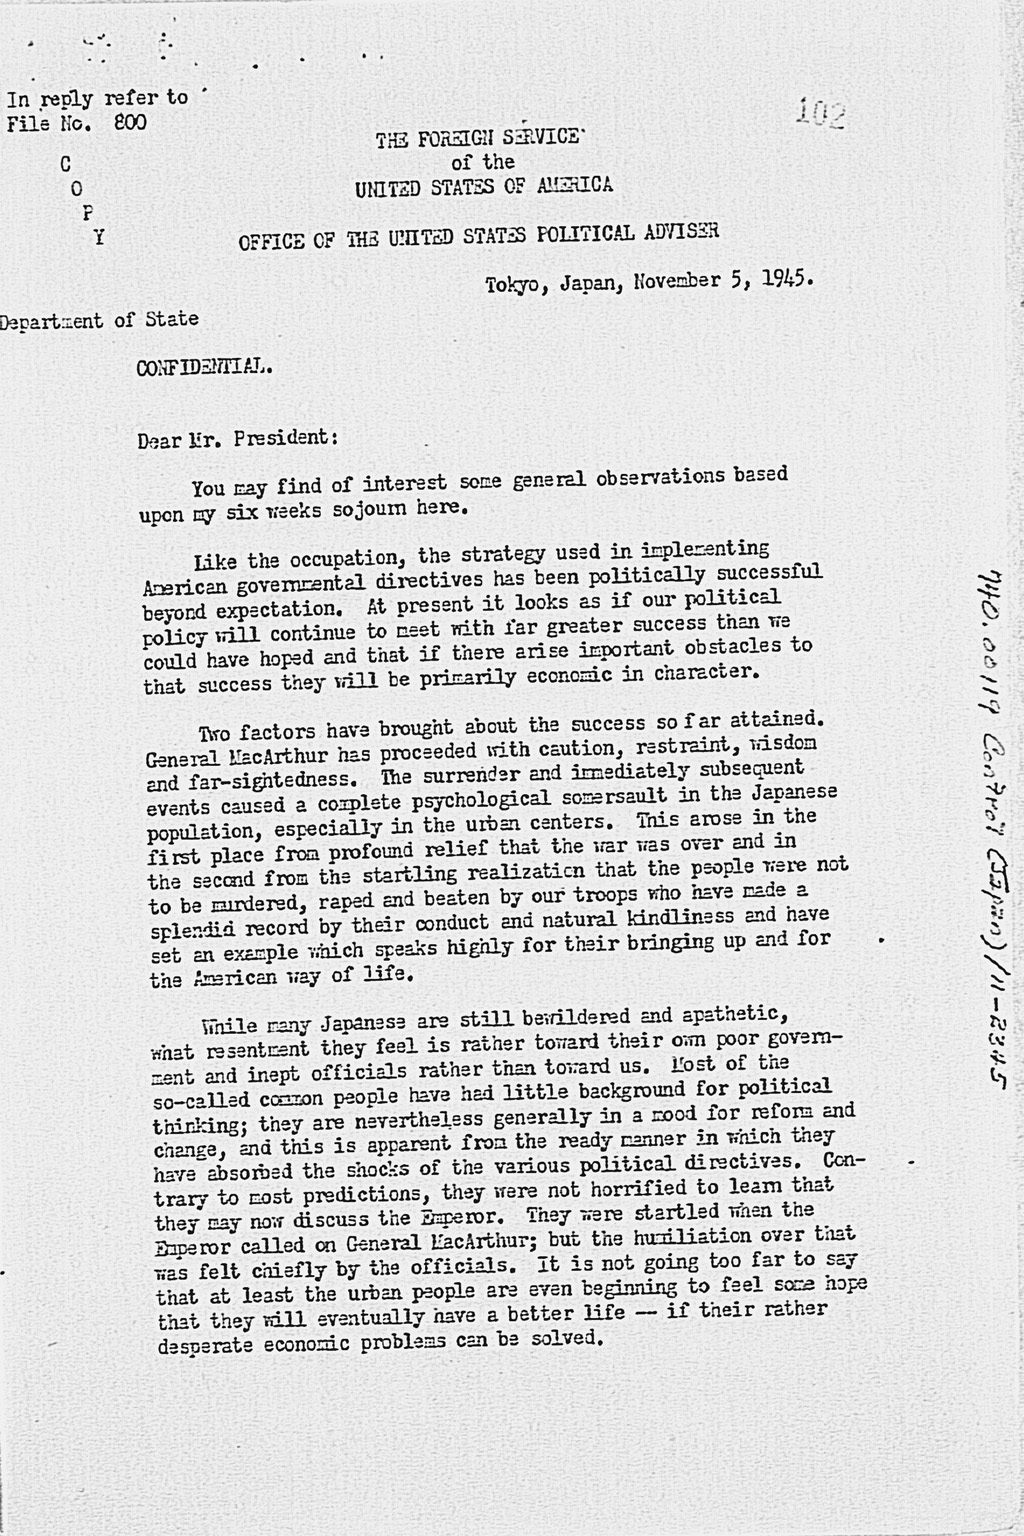 [Letter from George Atcheson, Jr. to the President dated November 5, 1945.](Larger image)